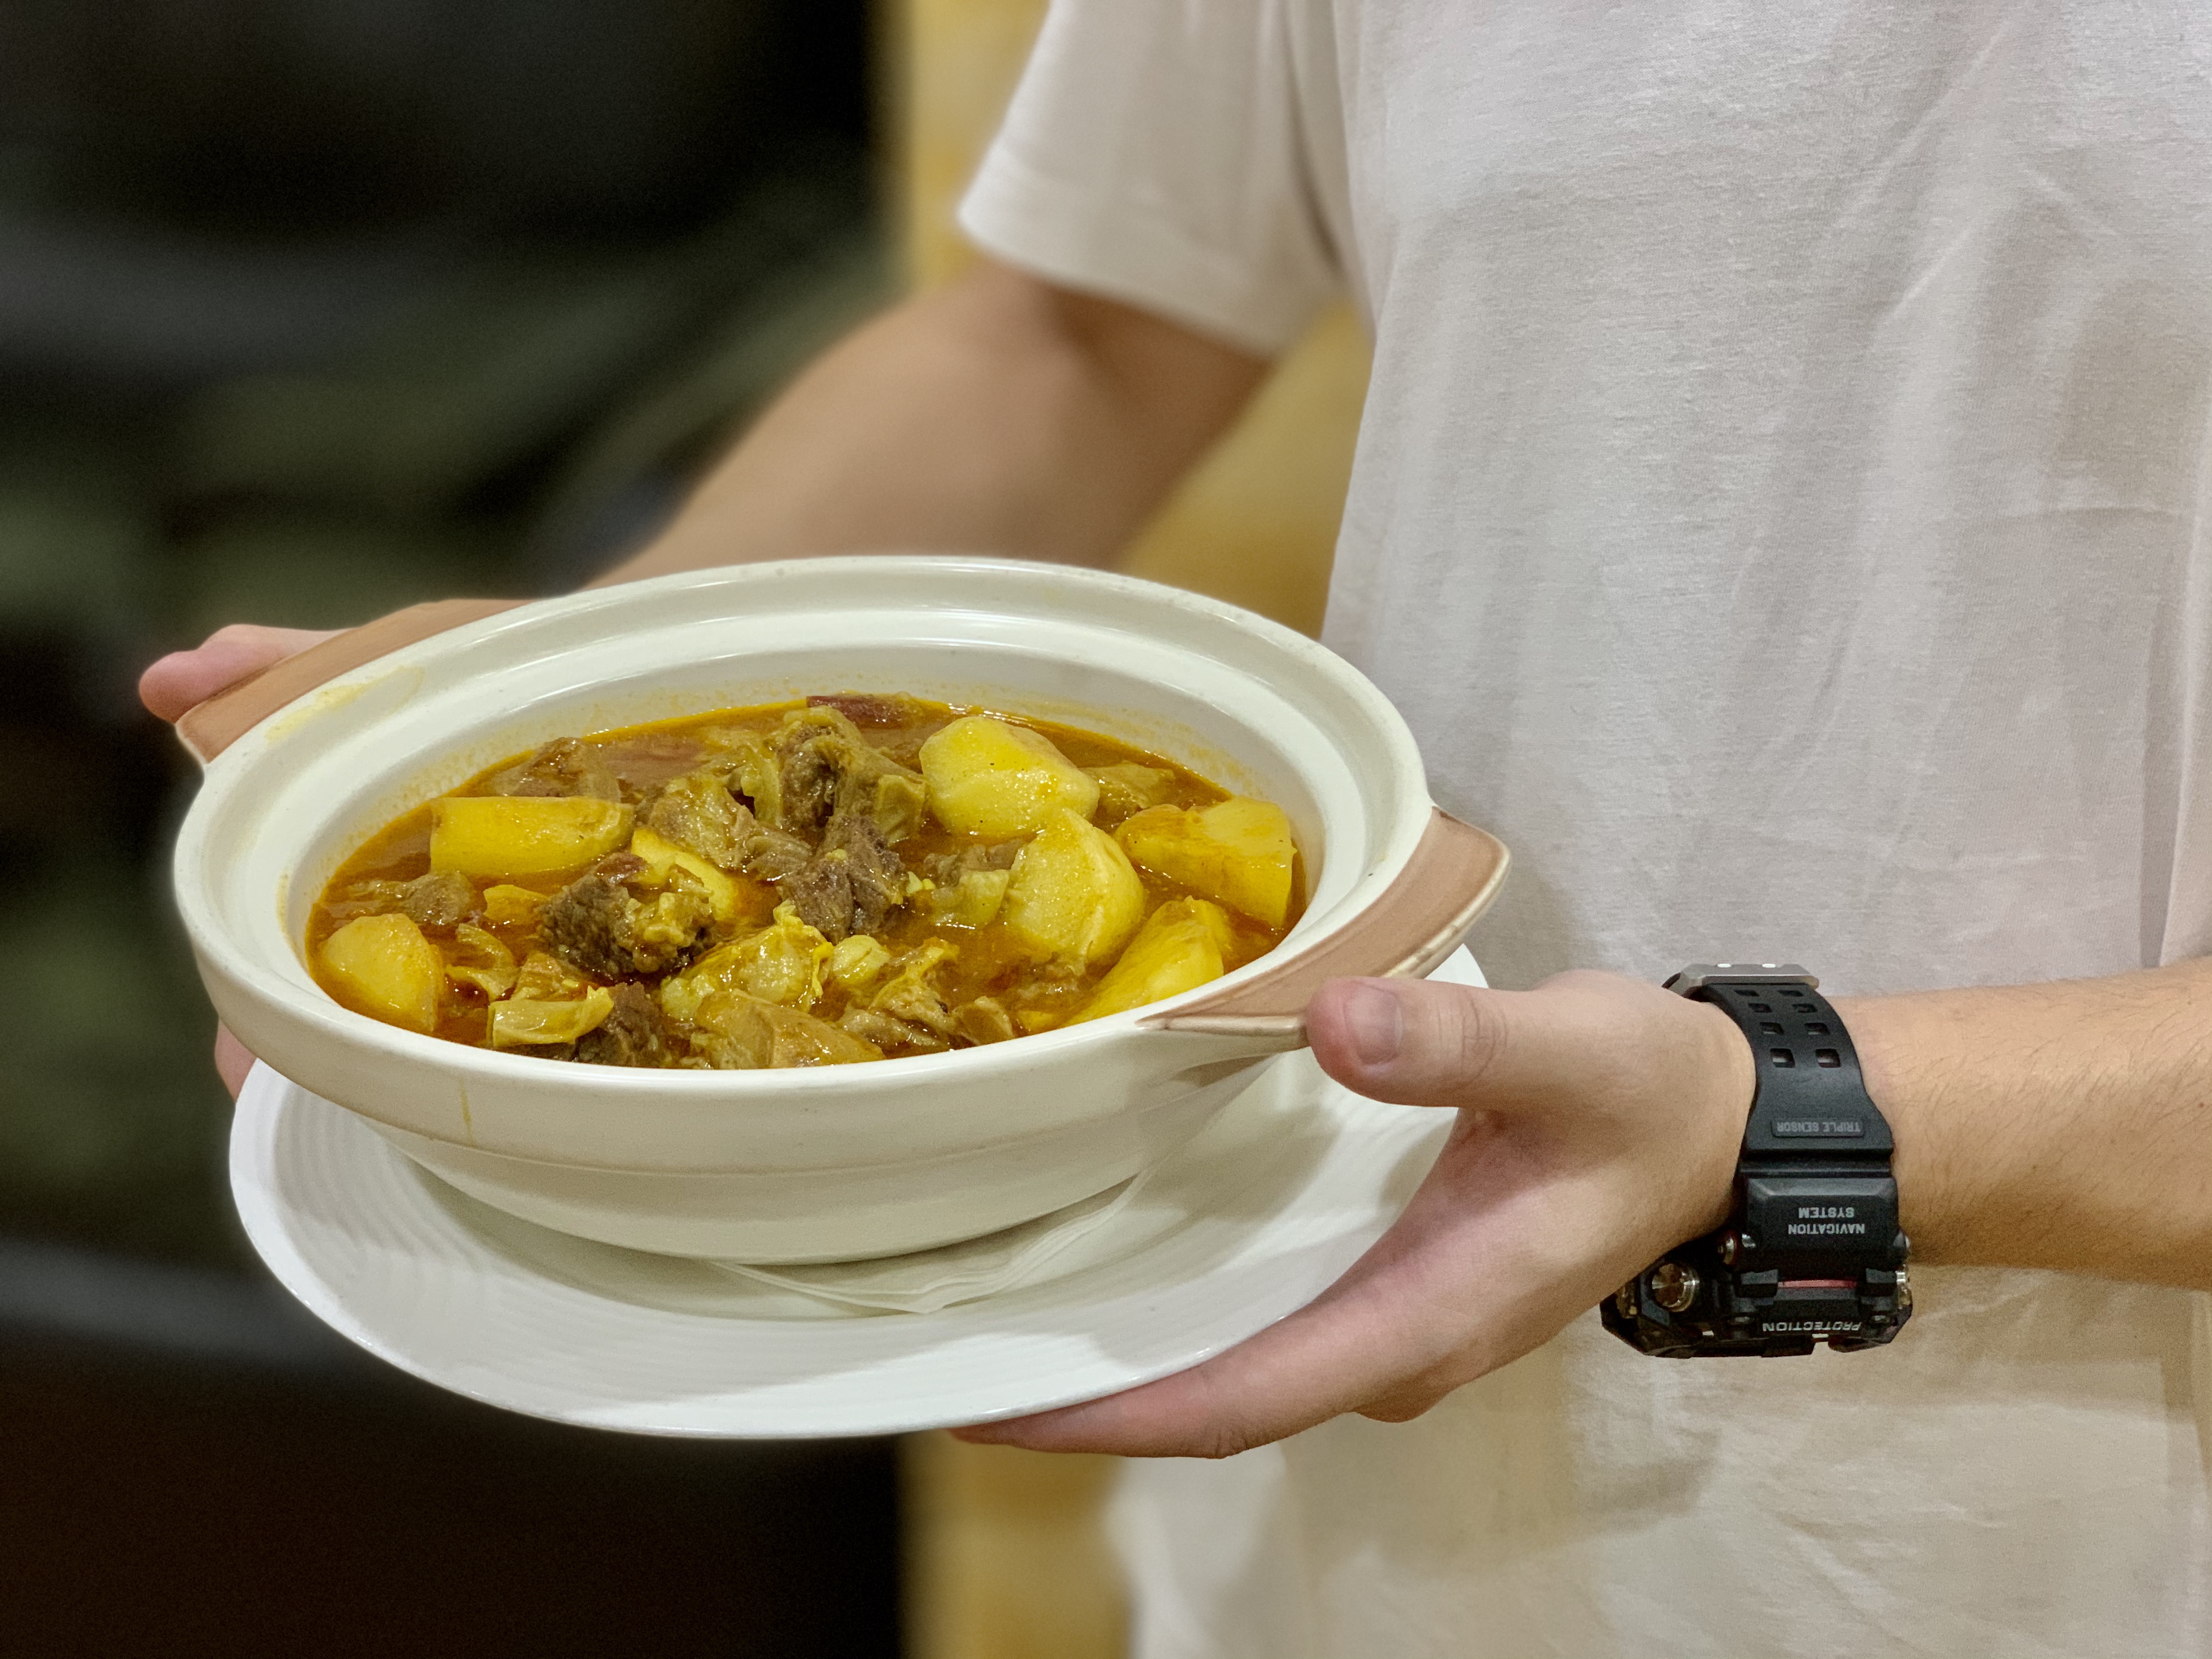 Julio Lei holding a pot of ox tail curry from APOMAC Macau Lifestyle